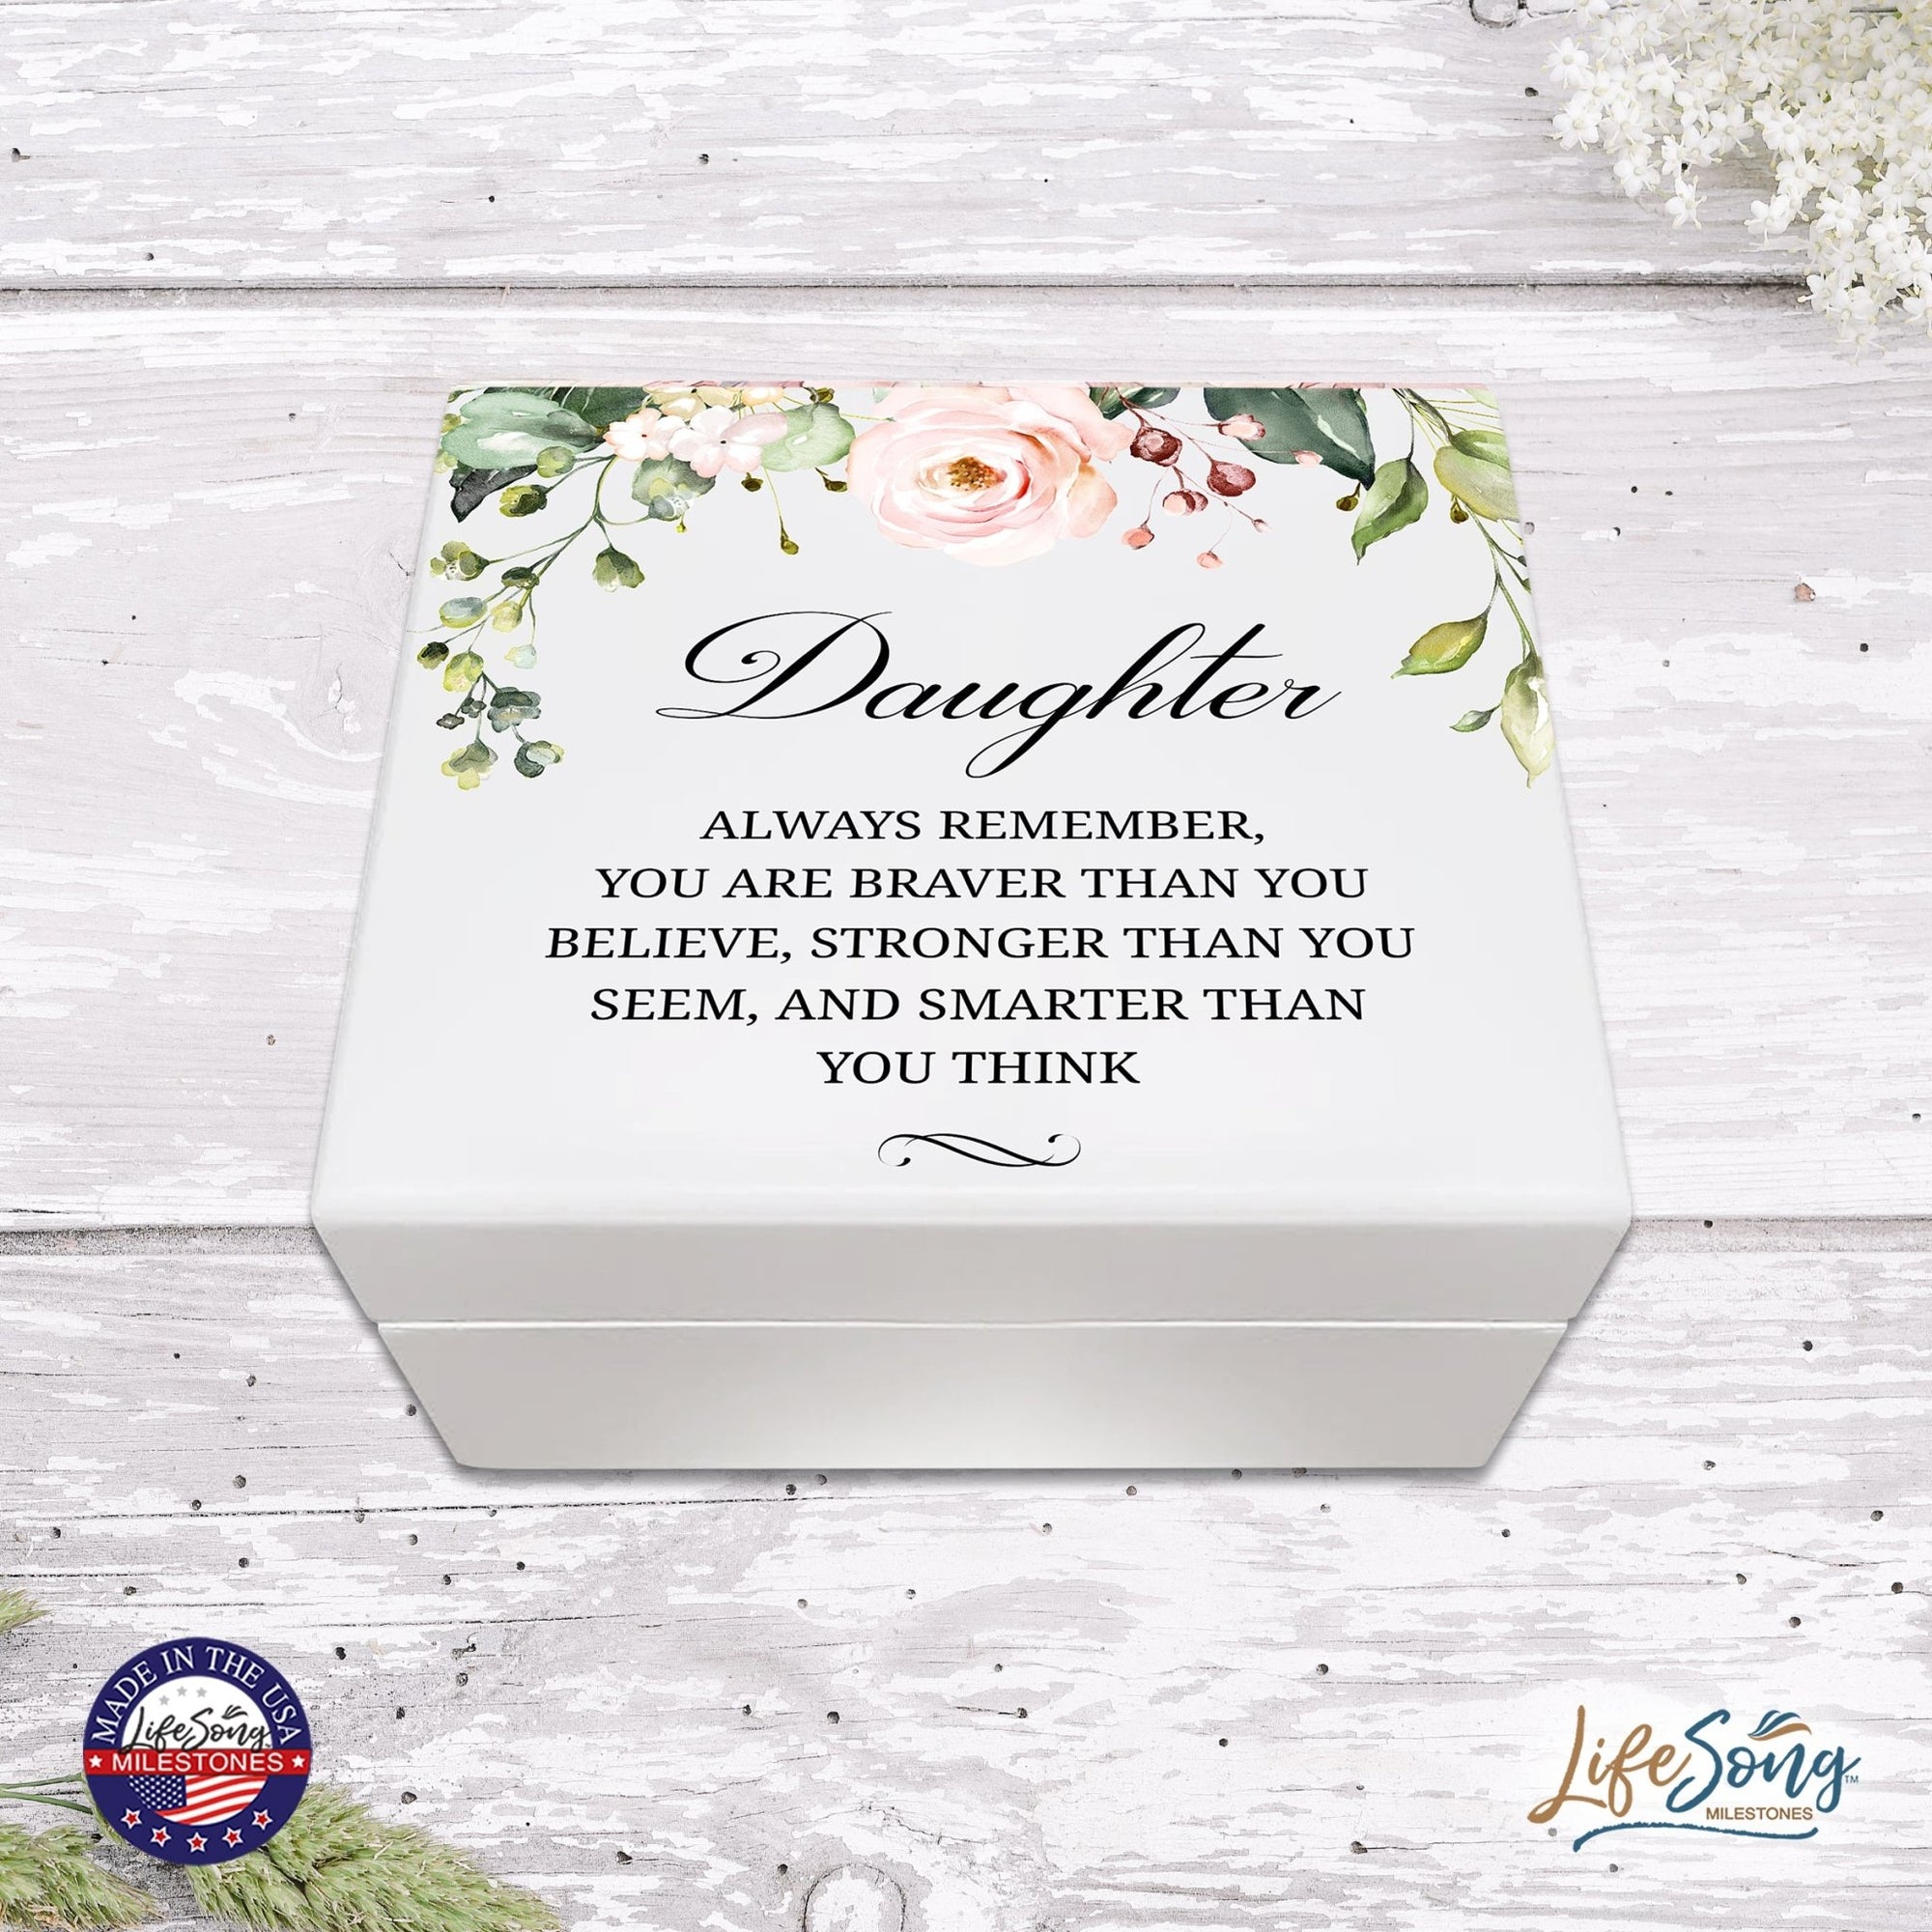 Baptism White Jewelry Keepsake Box for Daughter 6x5.5in - Daughter Always Remember - LifeSong Milestones